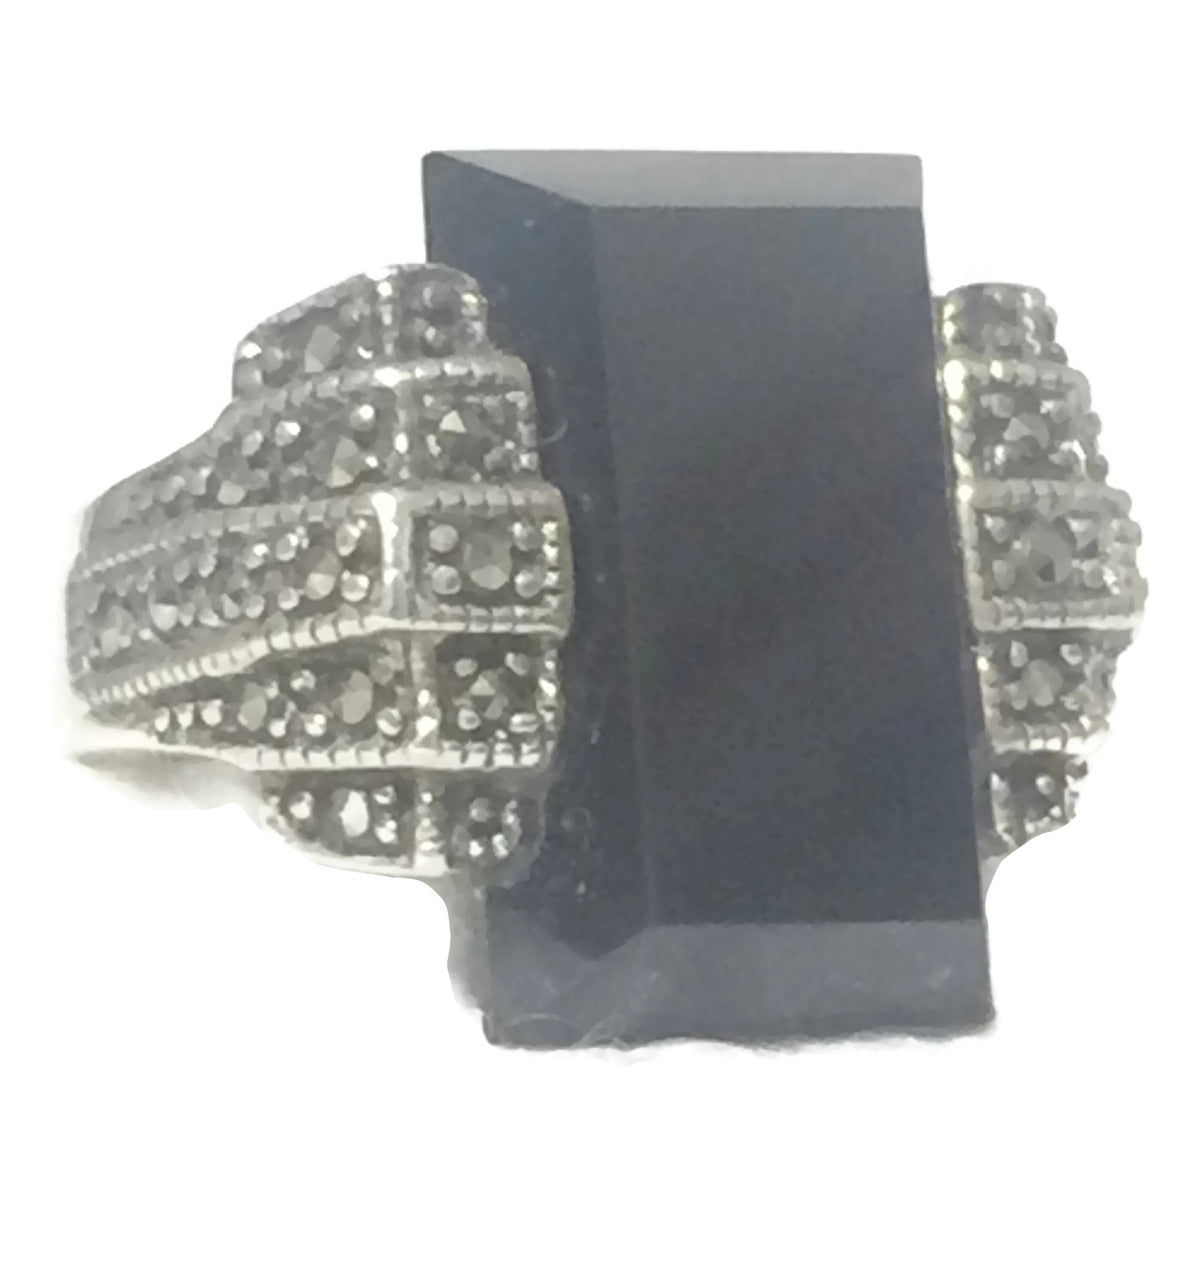 Onyx Ring Art Deco Marcasite Sterling Silver Size 5.75